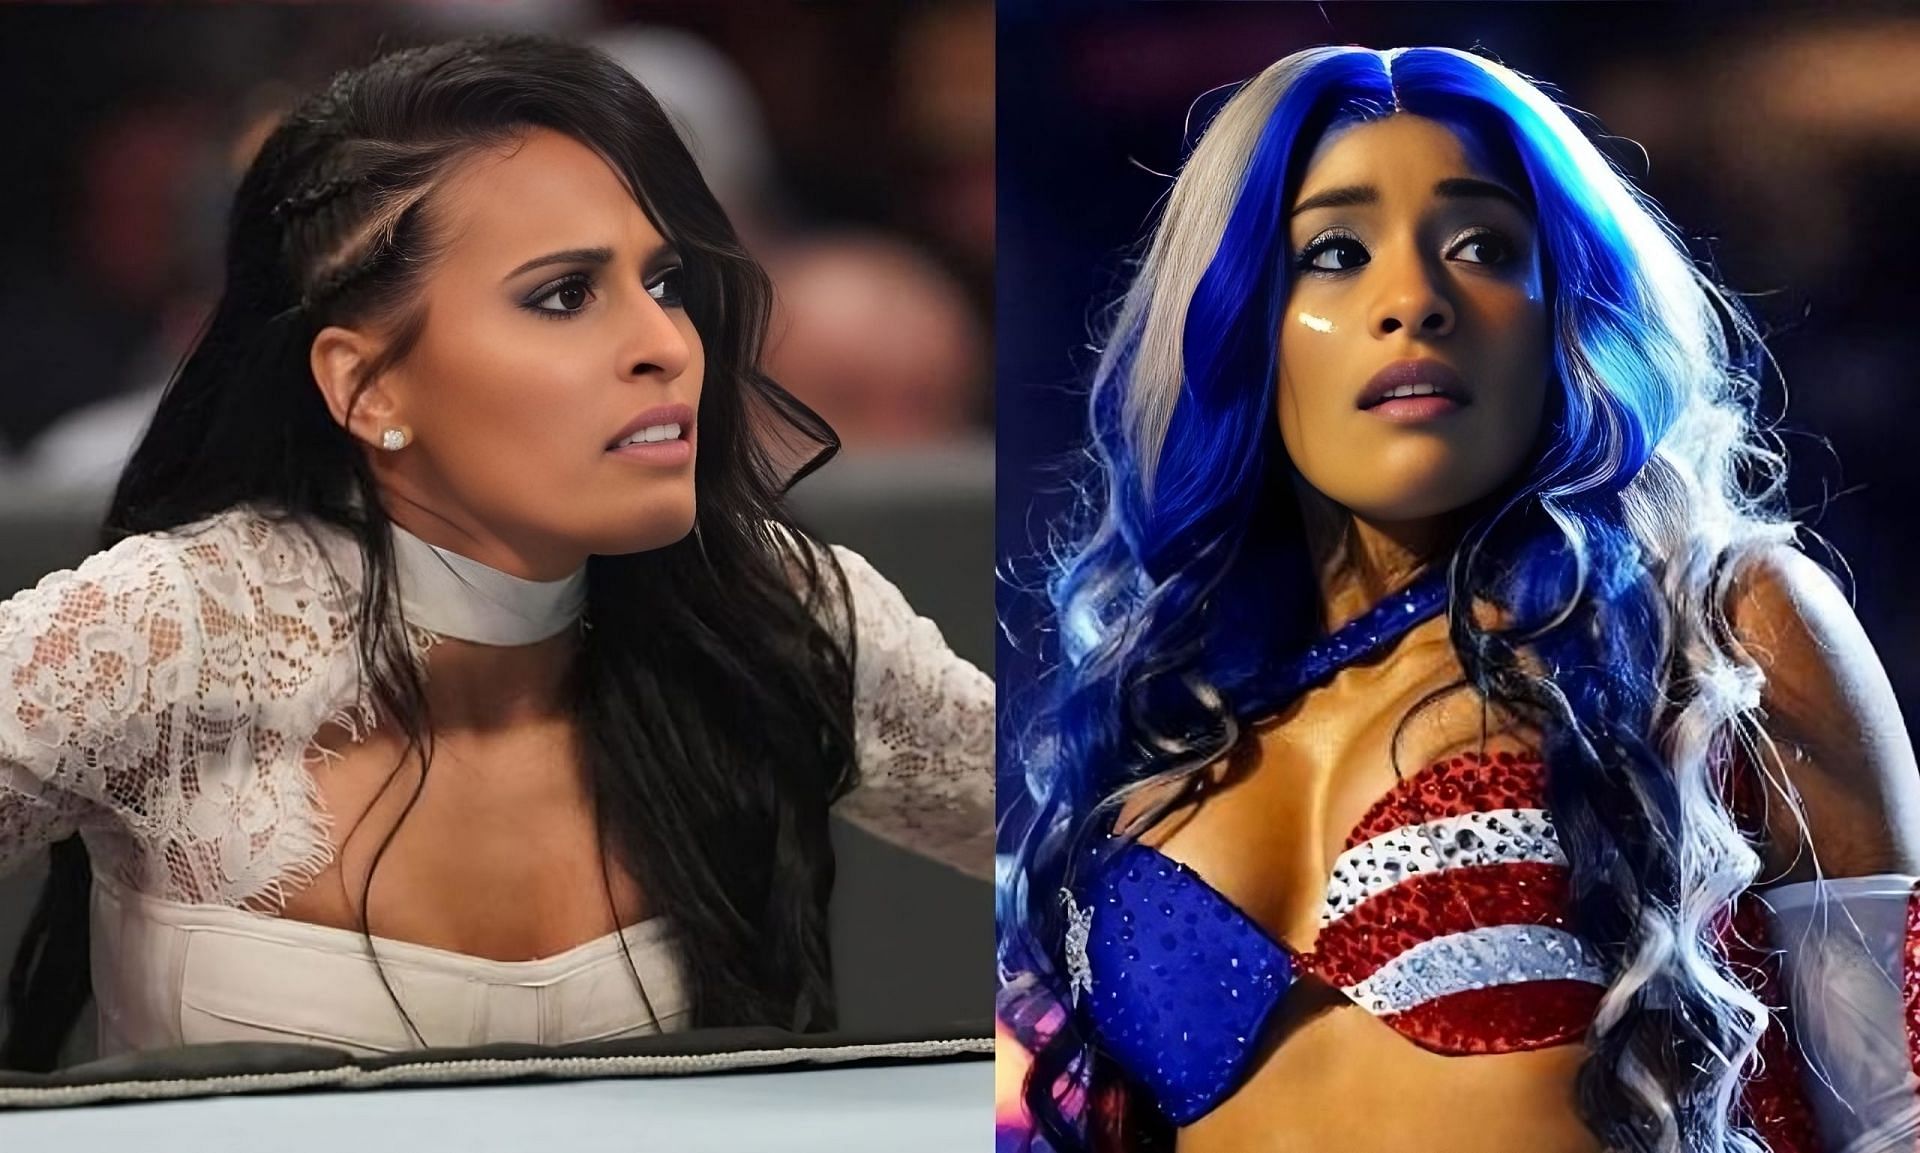 Zelina Vega is a member of the stable LWO